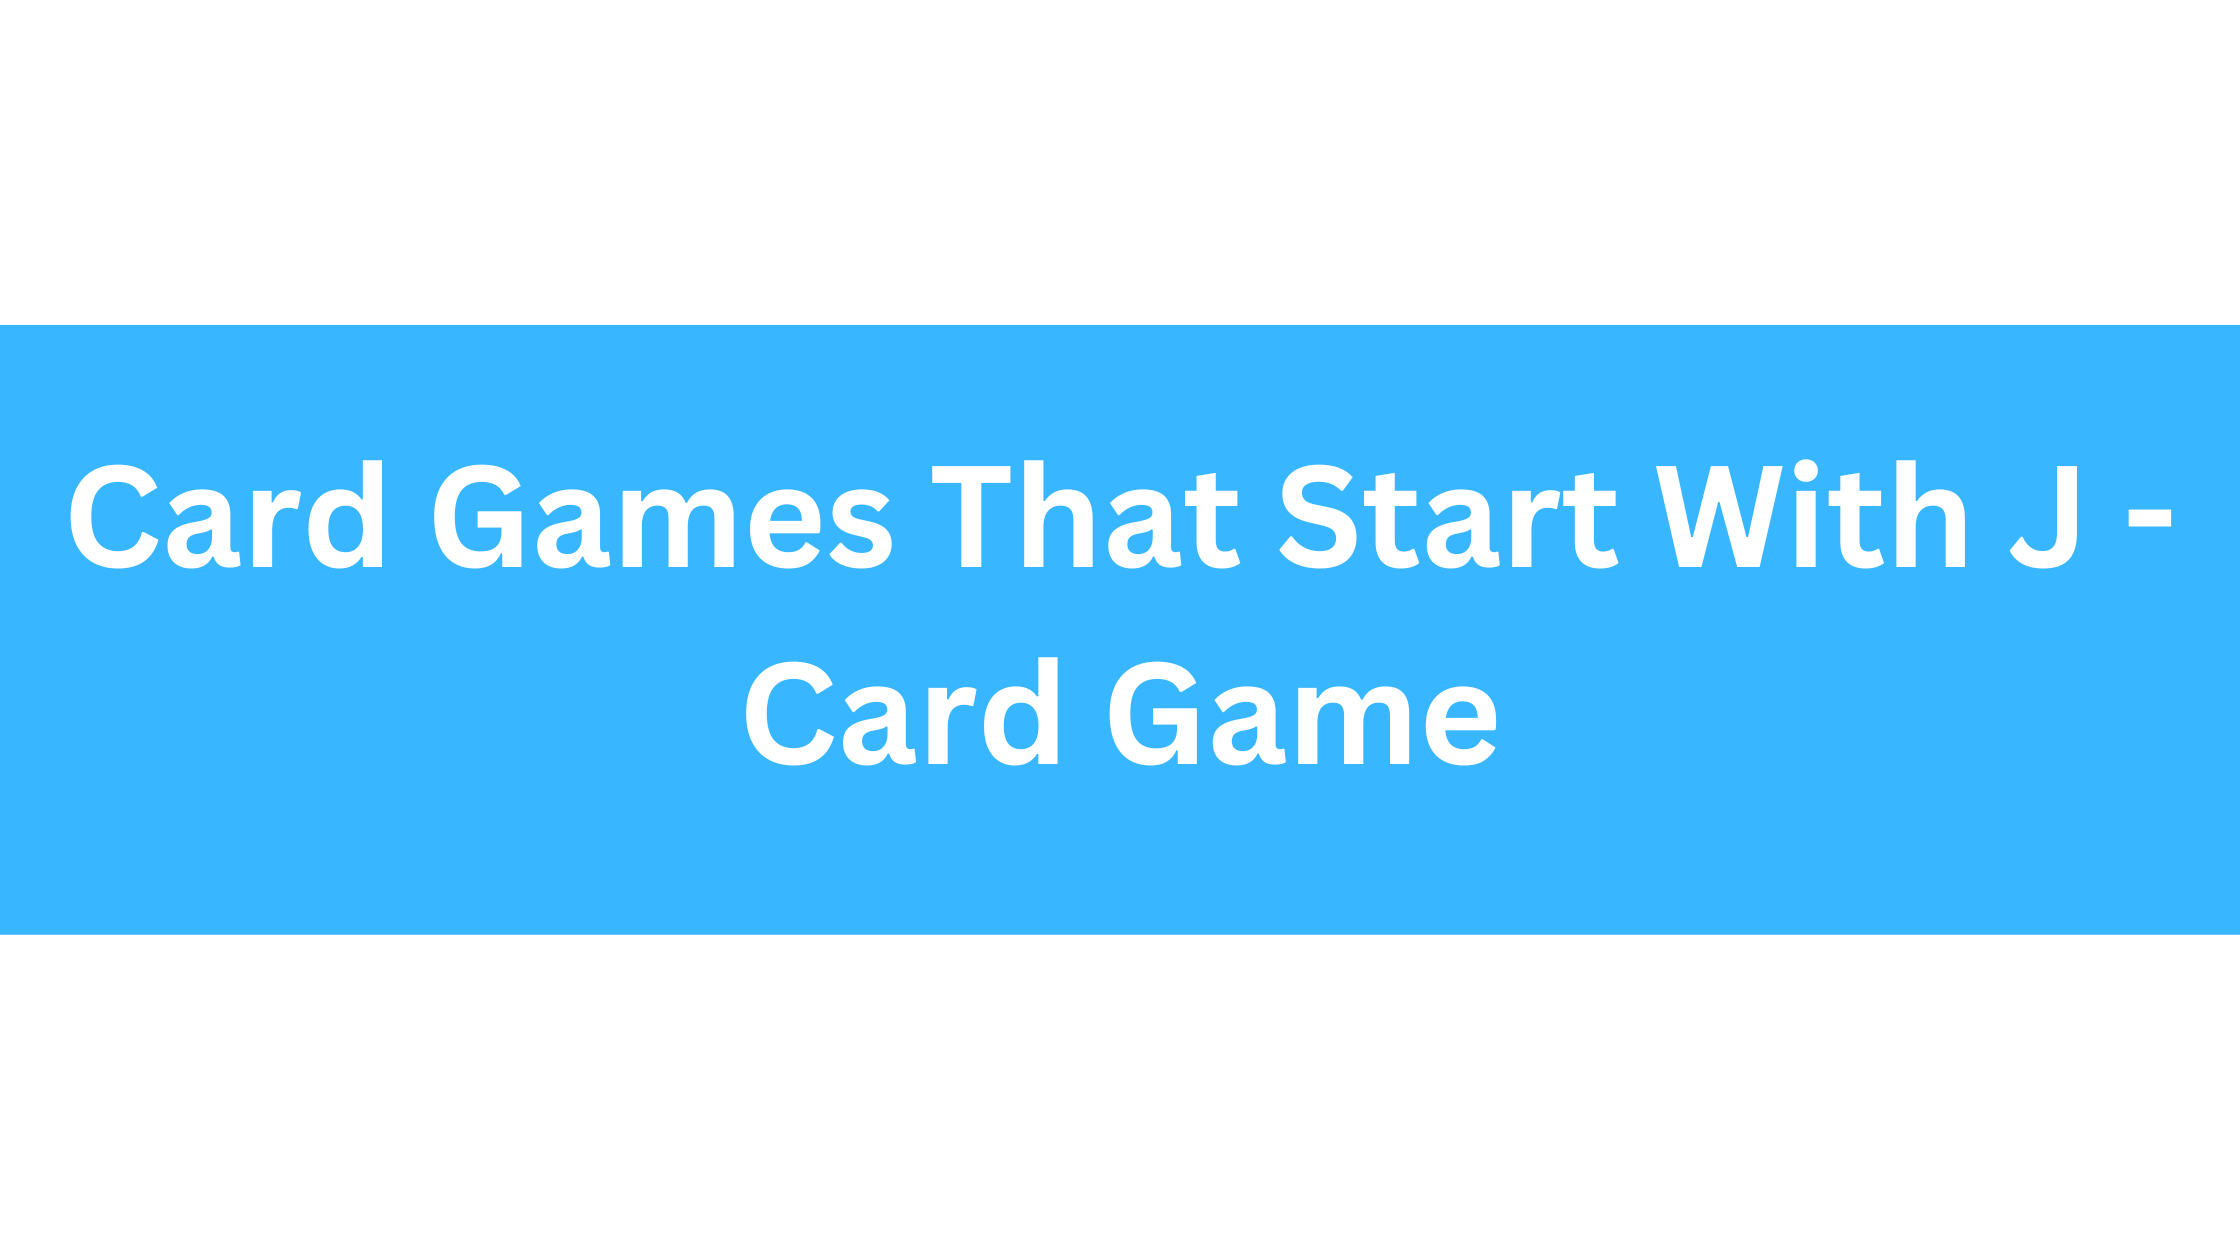 Card Games That Start With J